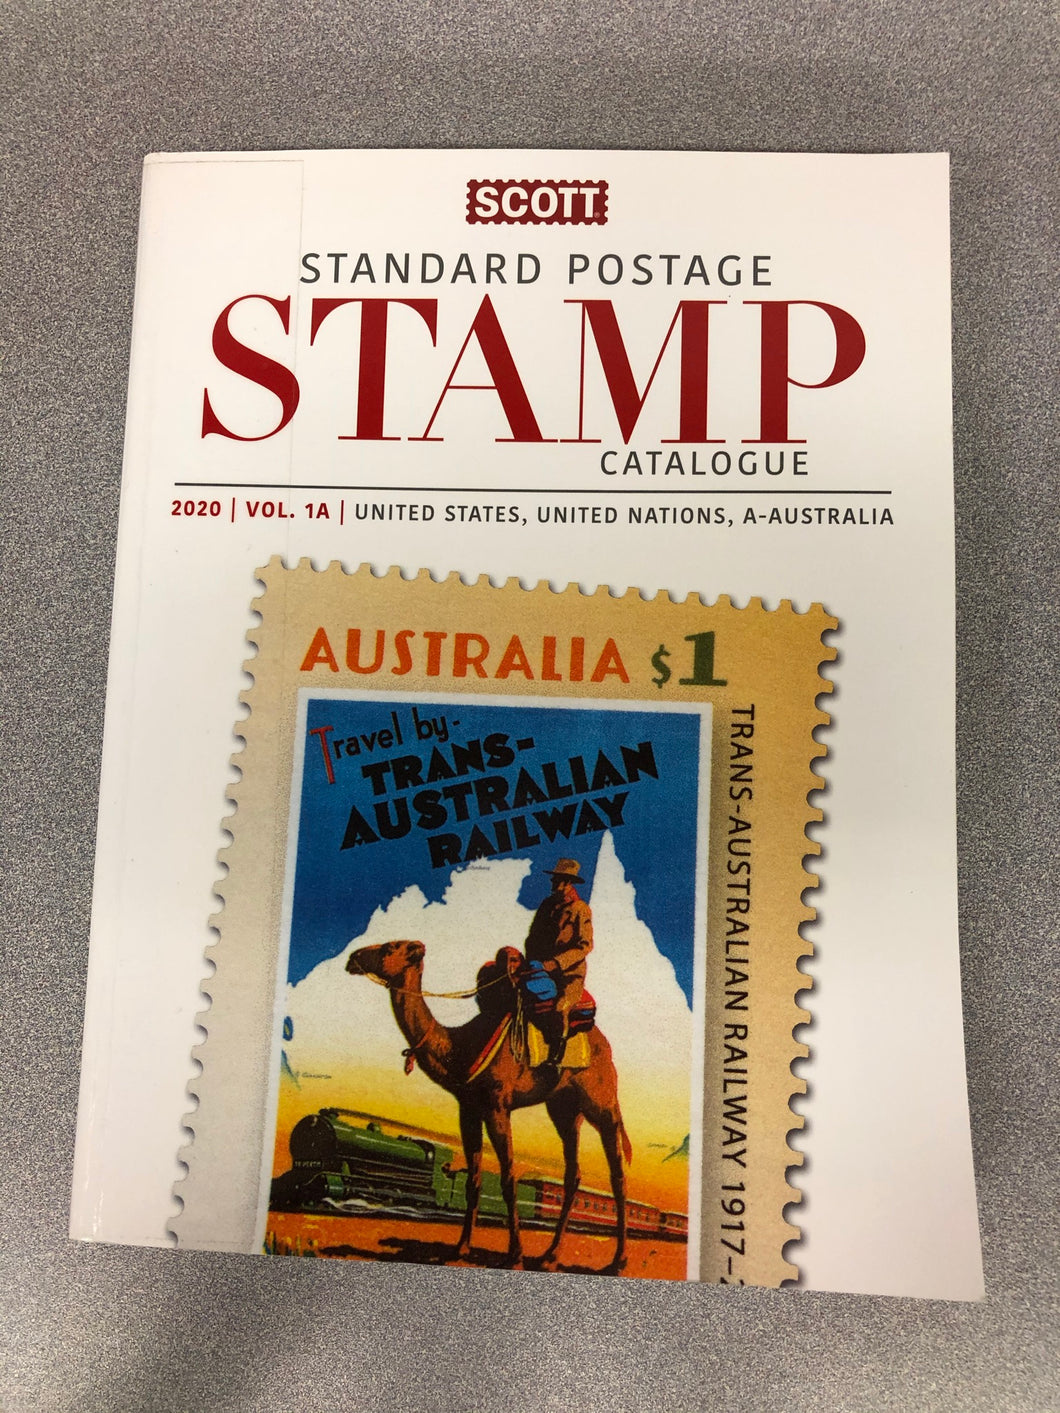 2020 Standard Postage Stamp Catalogue: One Hundred and Seventy-Sixth Edition in Six Volumes [2019] SS 6/21